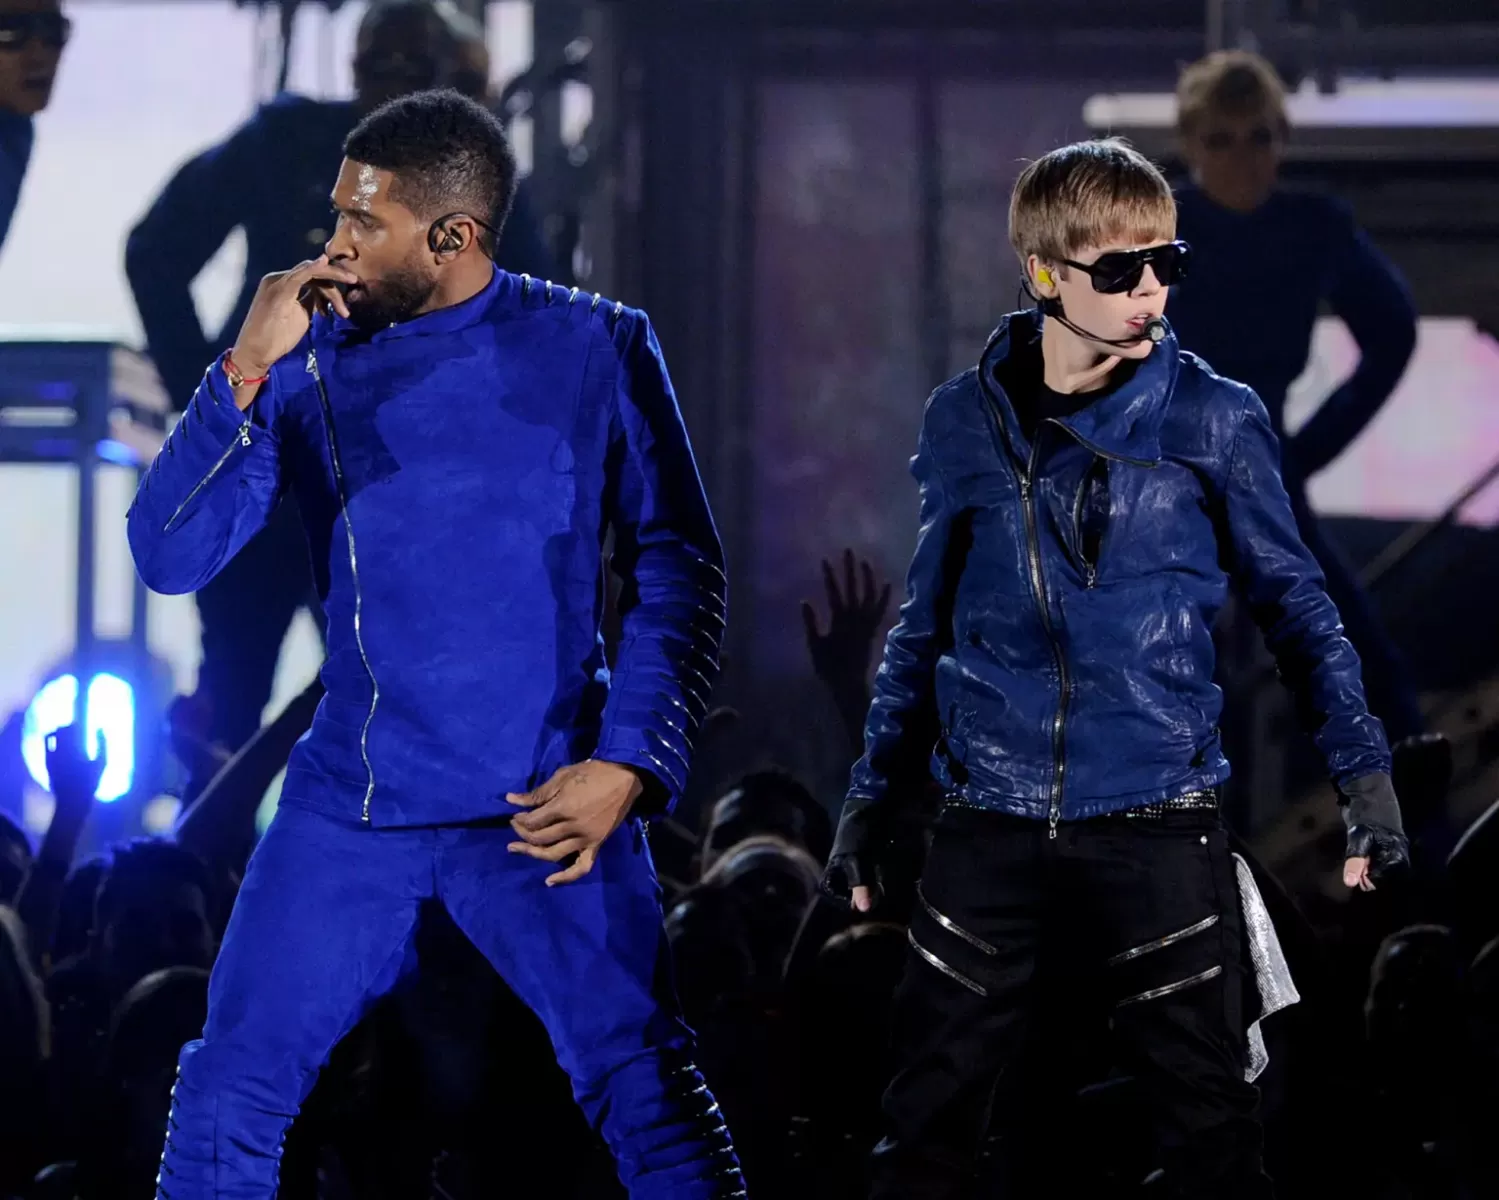 Usher breaks silence on Justin Bieber’s Super Bowl halftime show absence: He wanted ‘to tell a different story’, Super Bowl, Justin Bieber’s Super Bowl, Usher breaks silence on Justin Bieber’s Super Bowl halftime show absence, Justin Bieber, Video Super Bowl, Post news hot today, US news video today, Hot news today, US news today, US today news, Today news Video